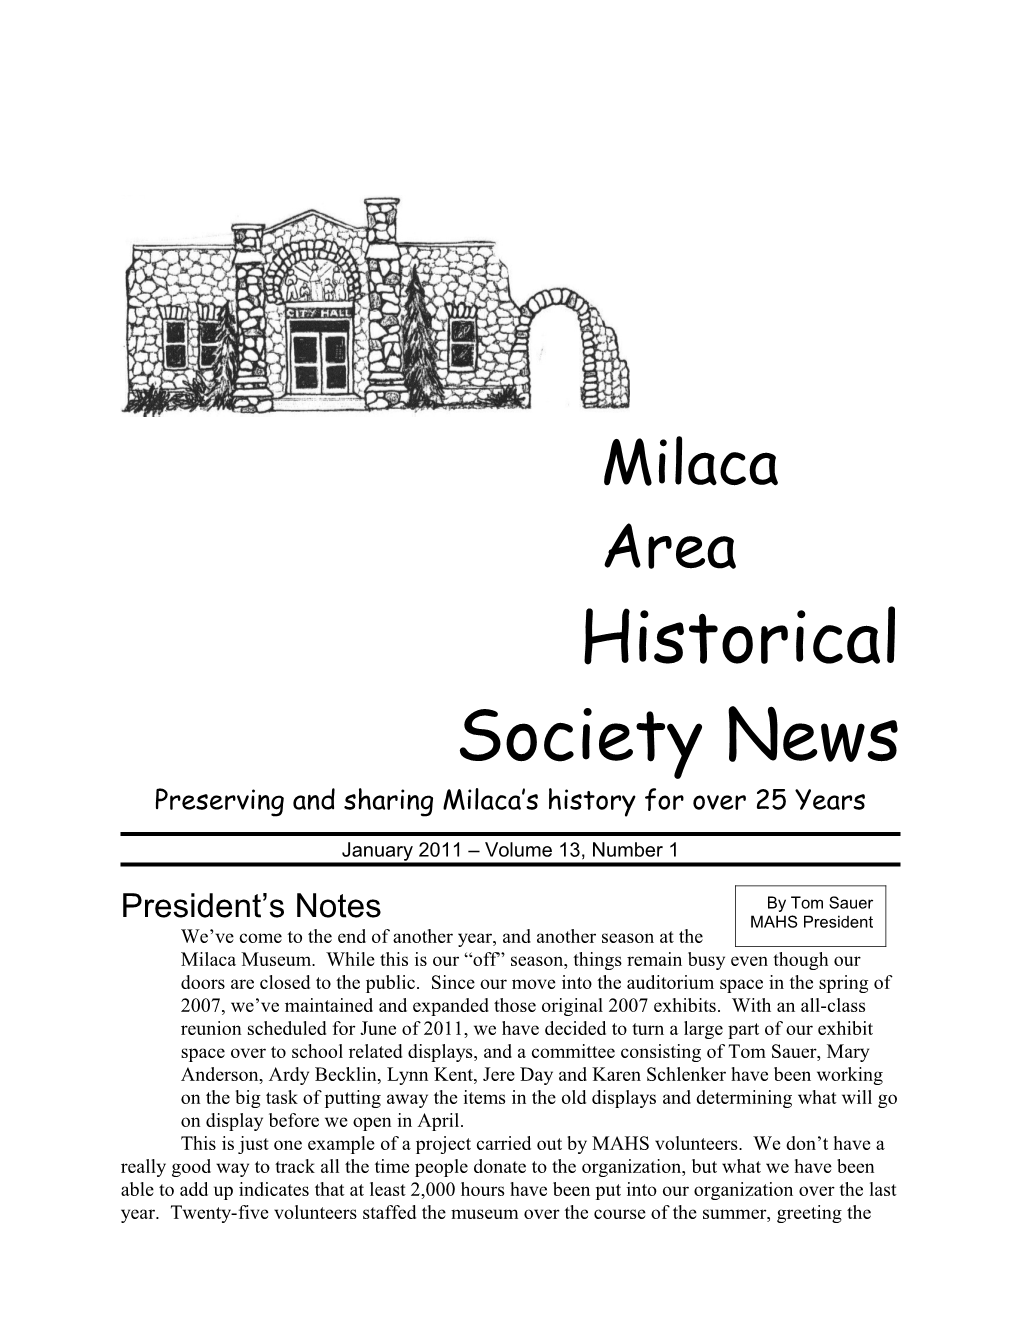 Preserving and Sharing Milaca S History for Over 25 Years